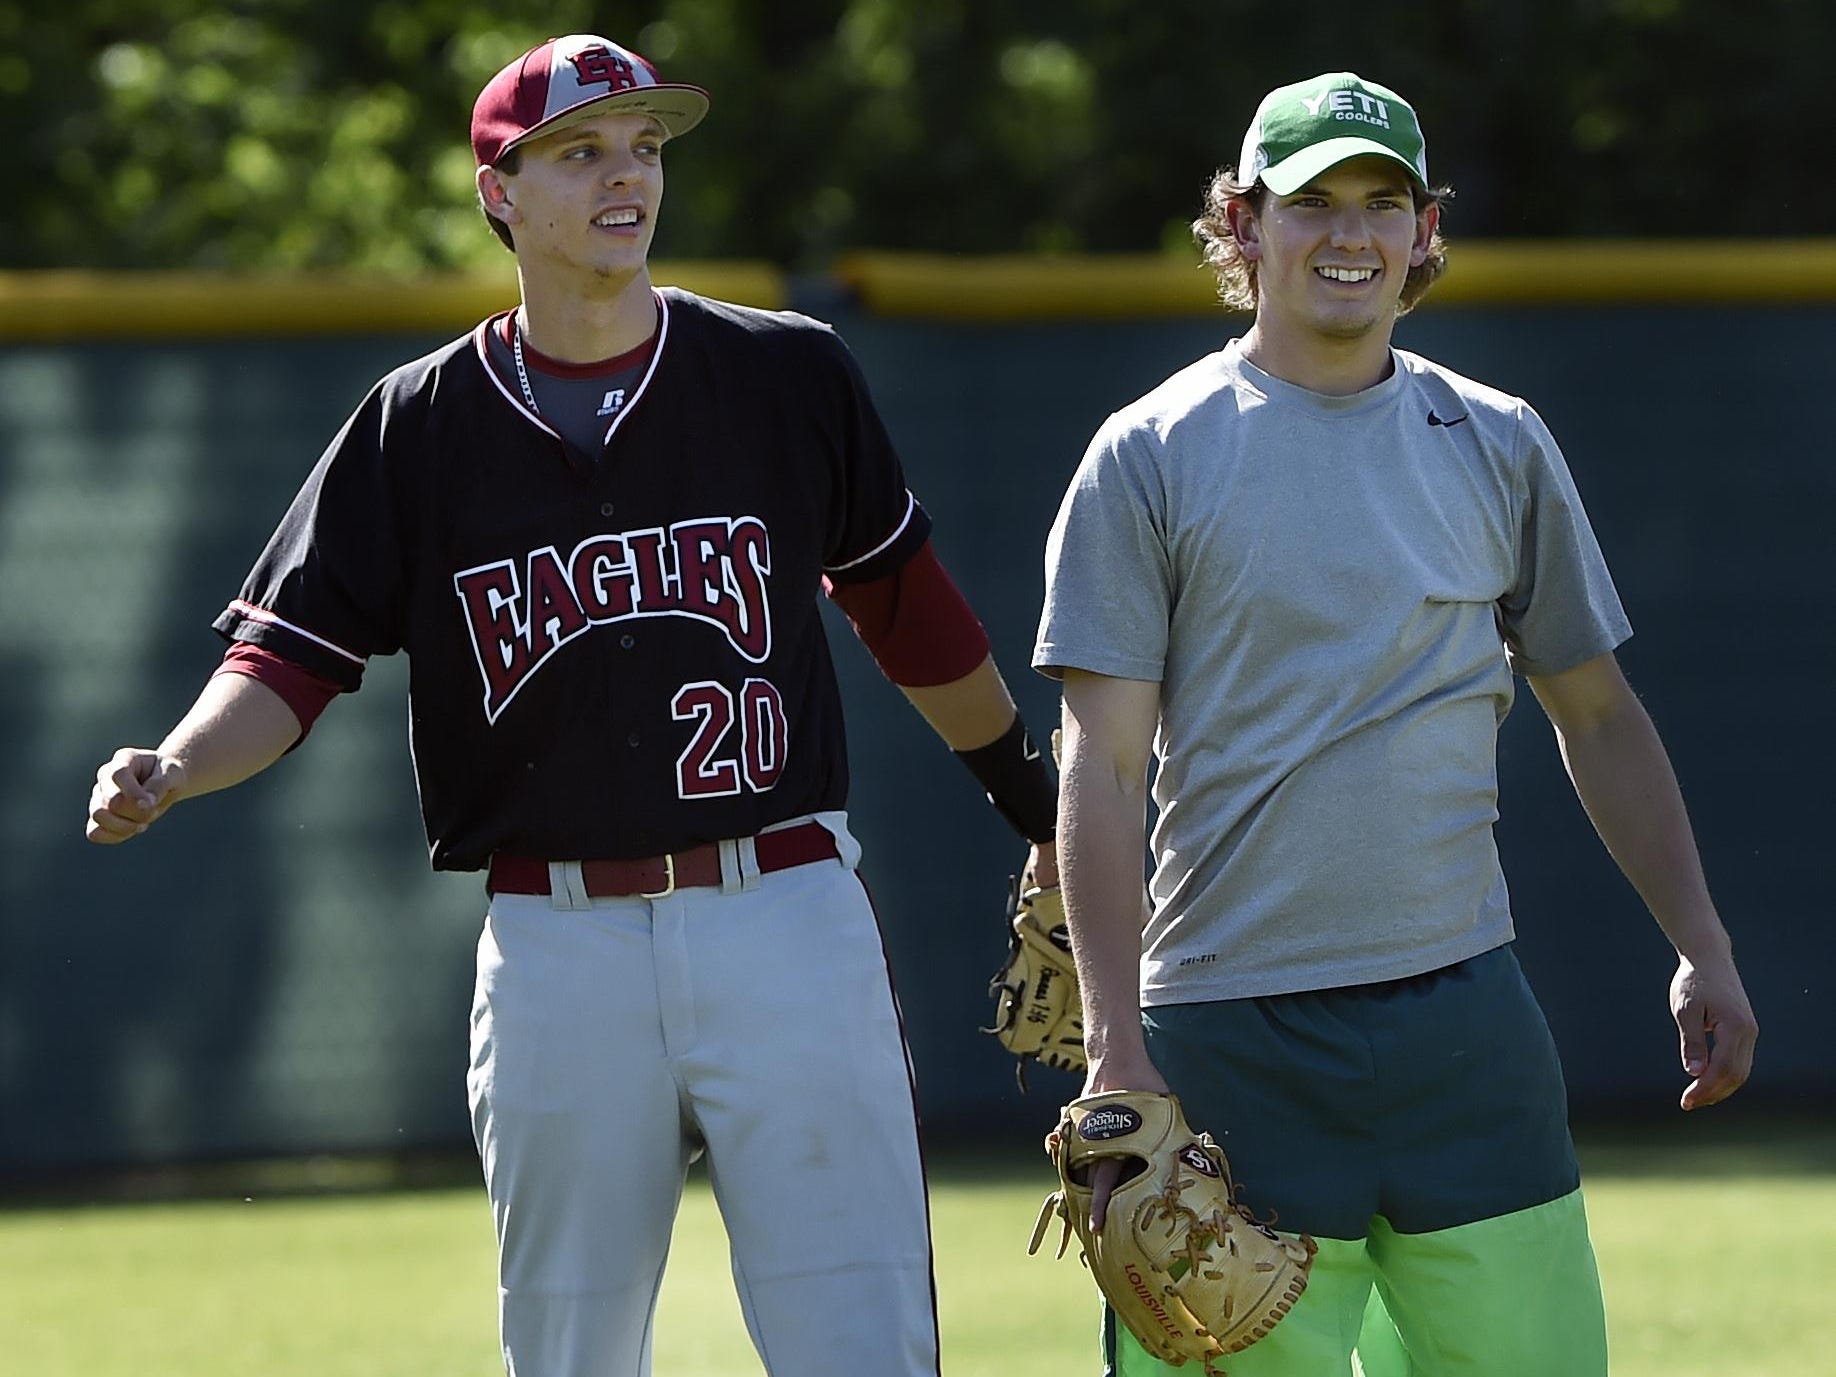 Ezell-Harding Christian School pitcher and third baseman, Grant Phillips, left, and pitcher Seth Wyse warm up before a game baseball game on Thursday, April 28, 2016, in Nashville, Tenn. Wyse could not play as because of an ankle injury.